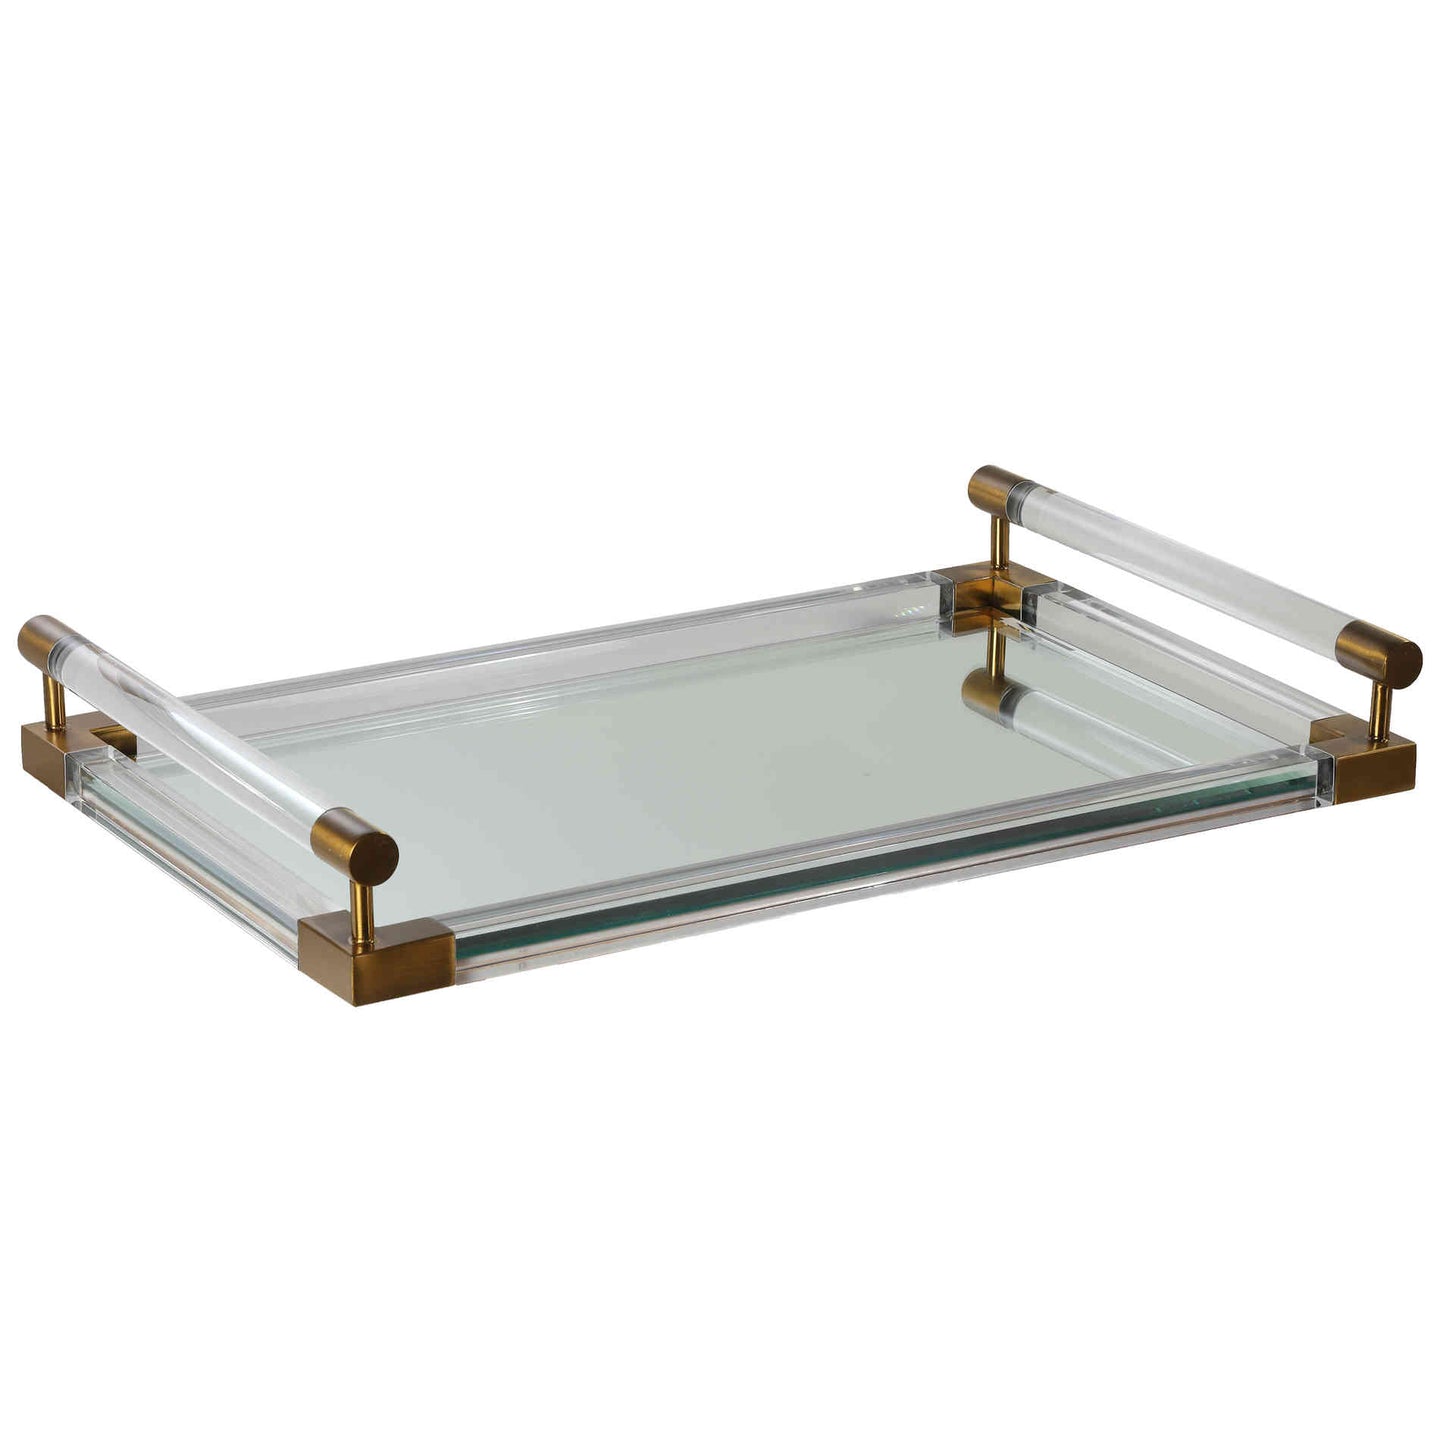 Cortesi Home Spinel Mirrored Acrylic Tray with Brass Accents